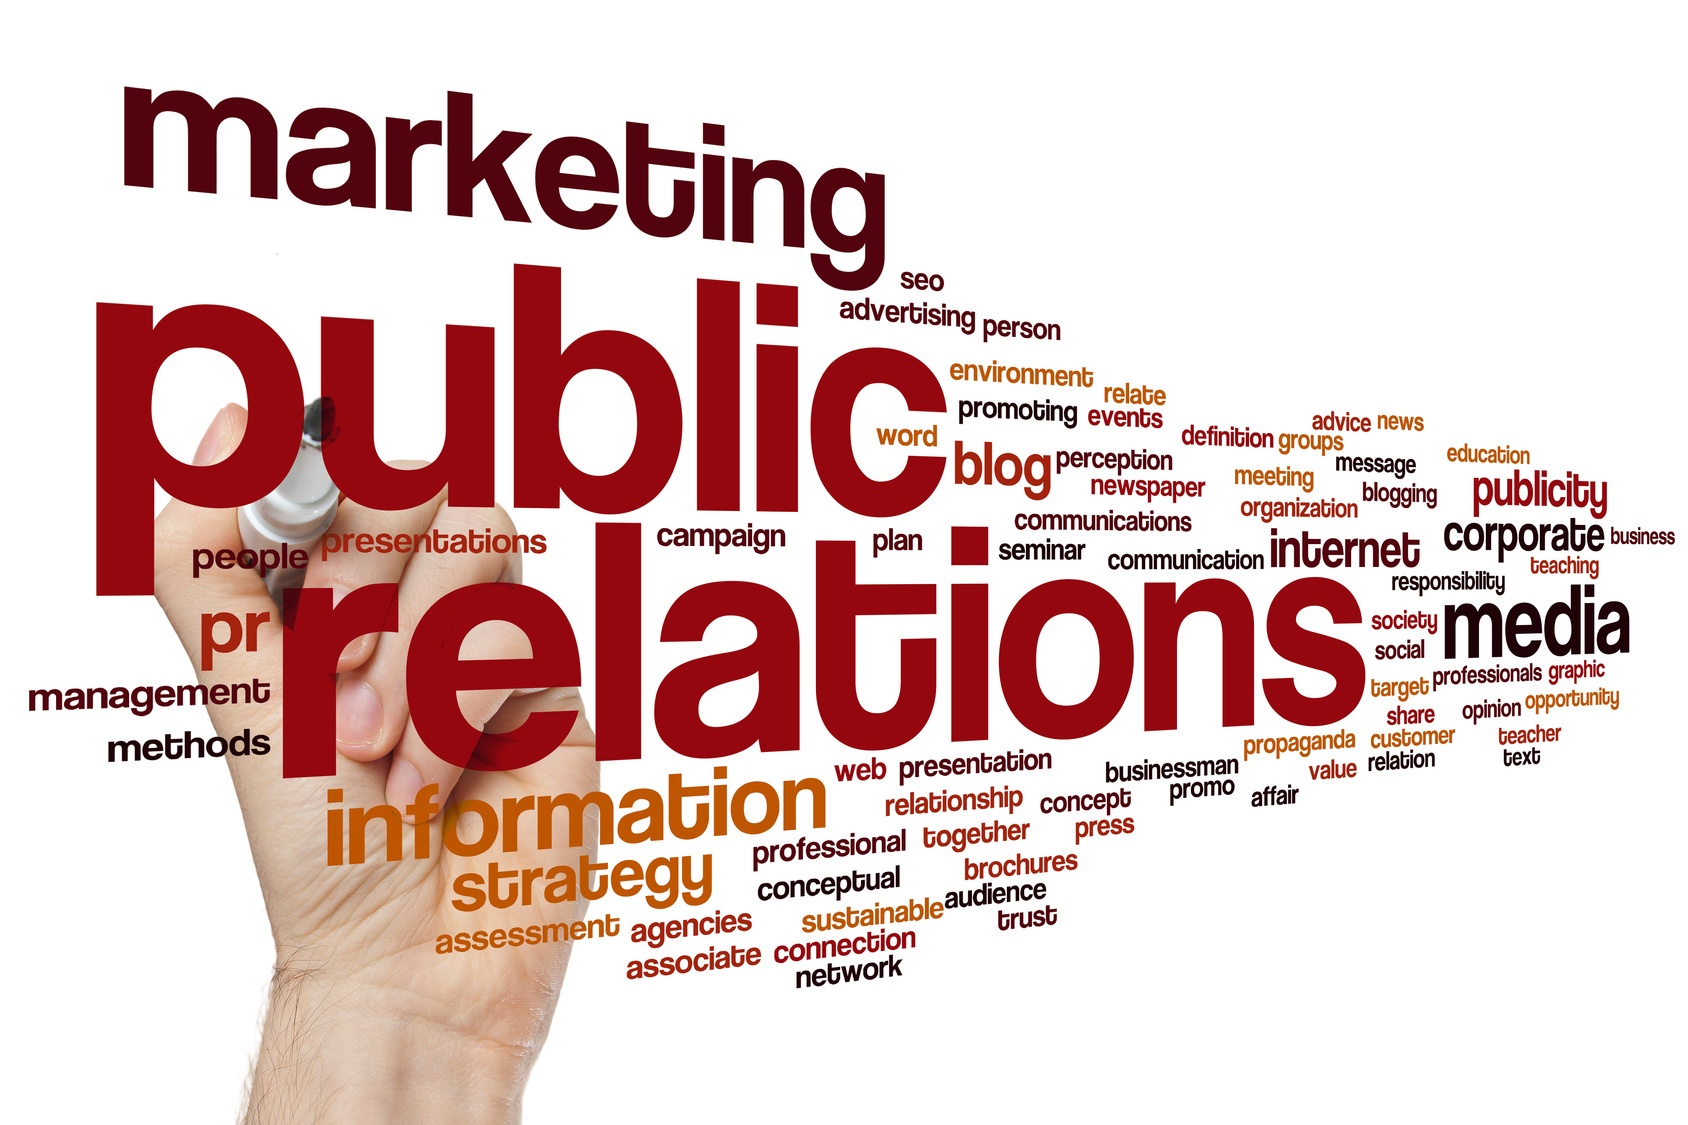 PR & Marketing Need to Share Content Responsibilities